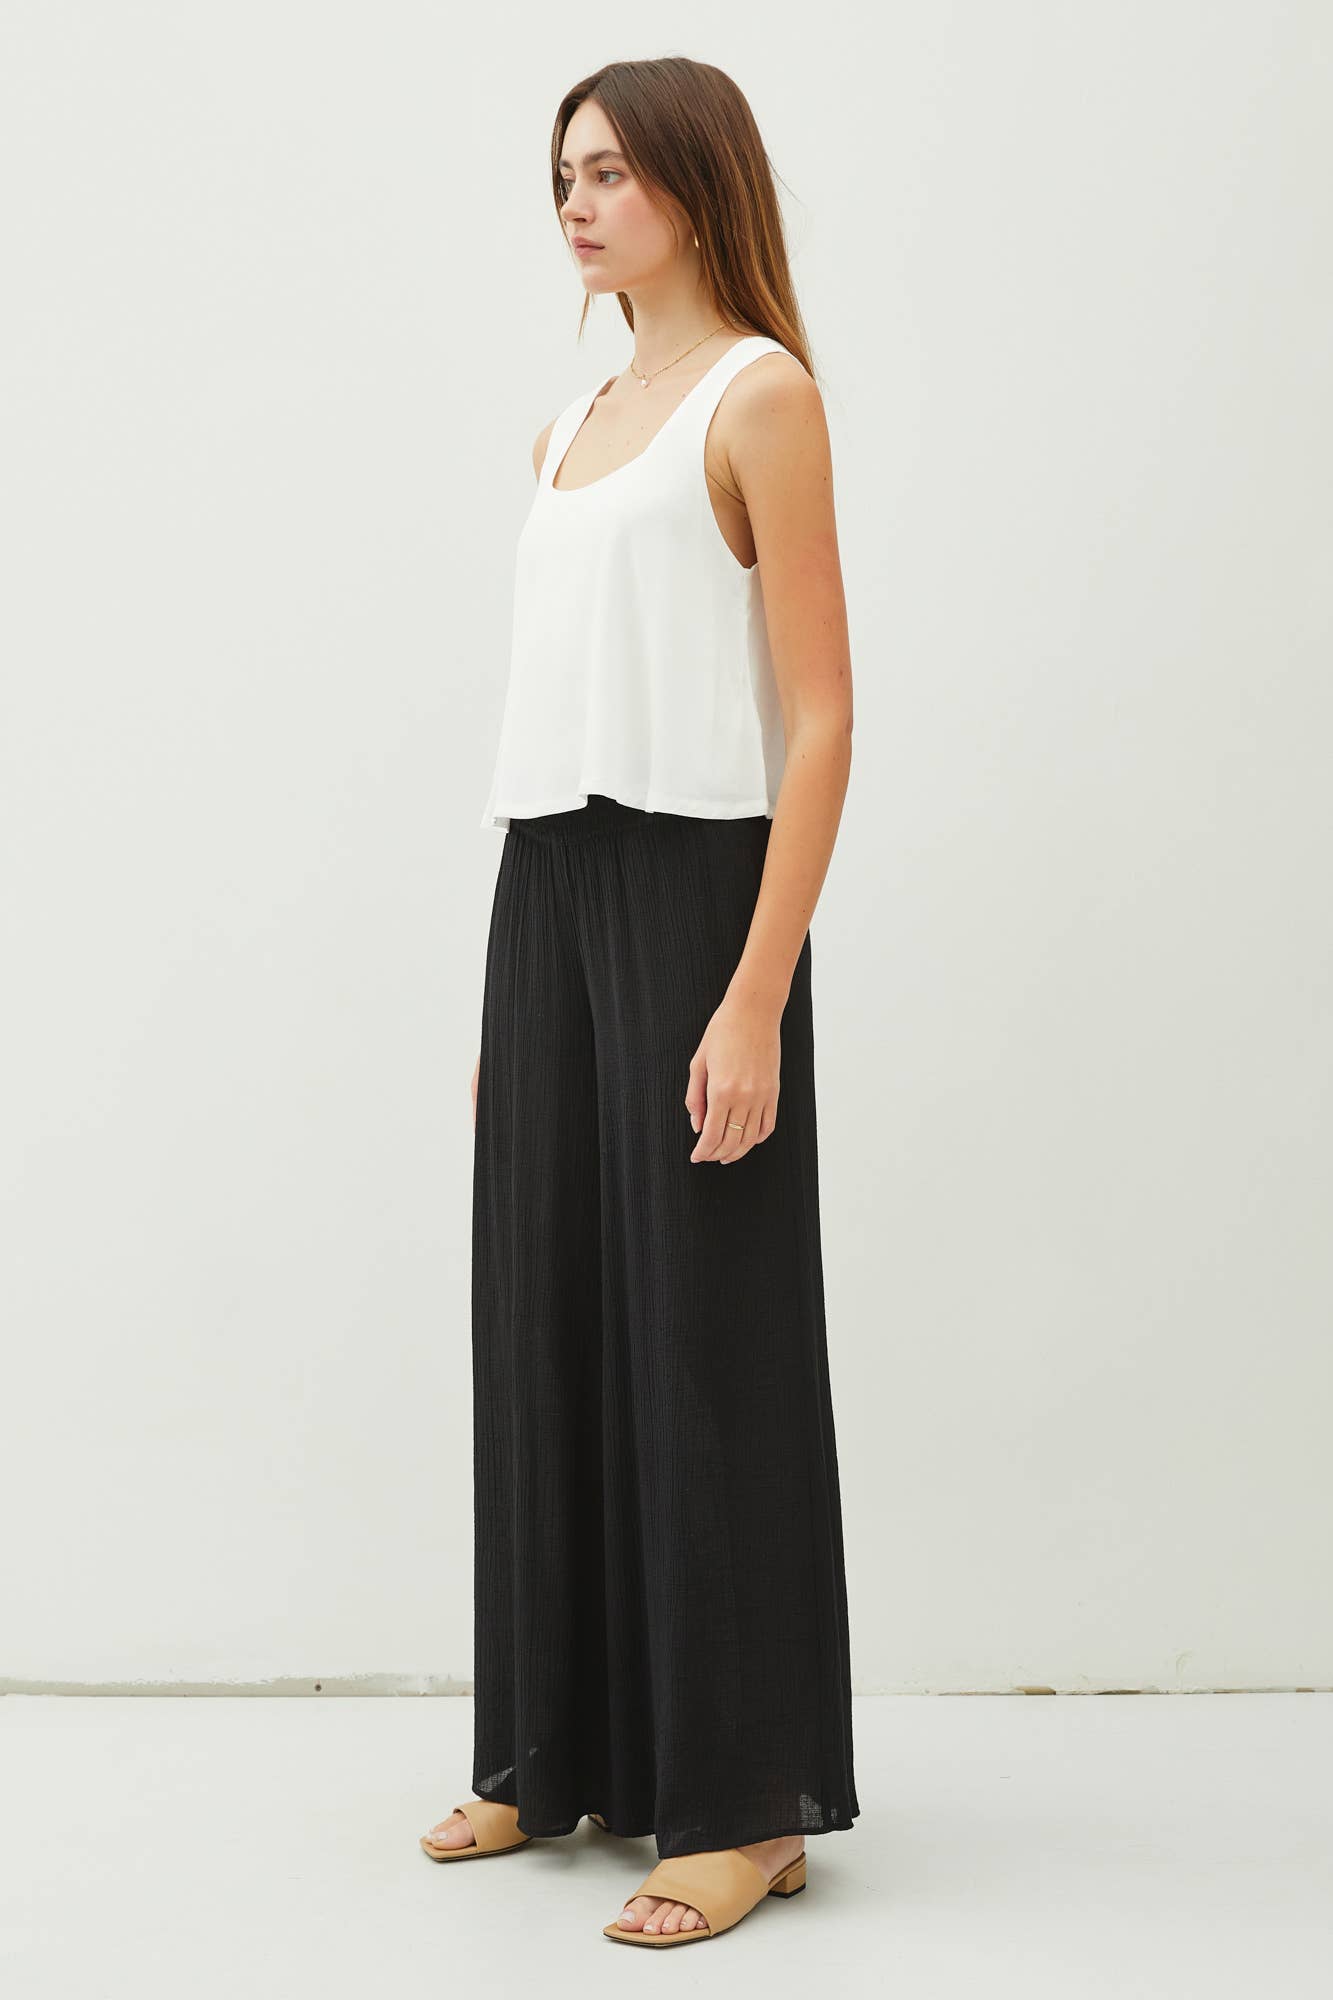 Tess - RAYON FLOWY SQUARE NECK CROP TANK TOP by Be Cool